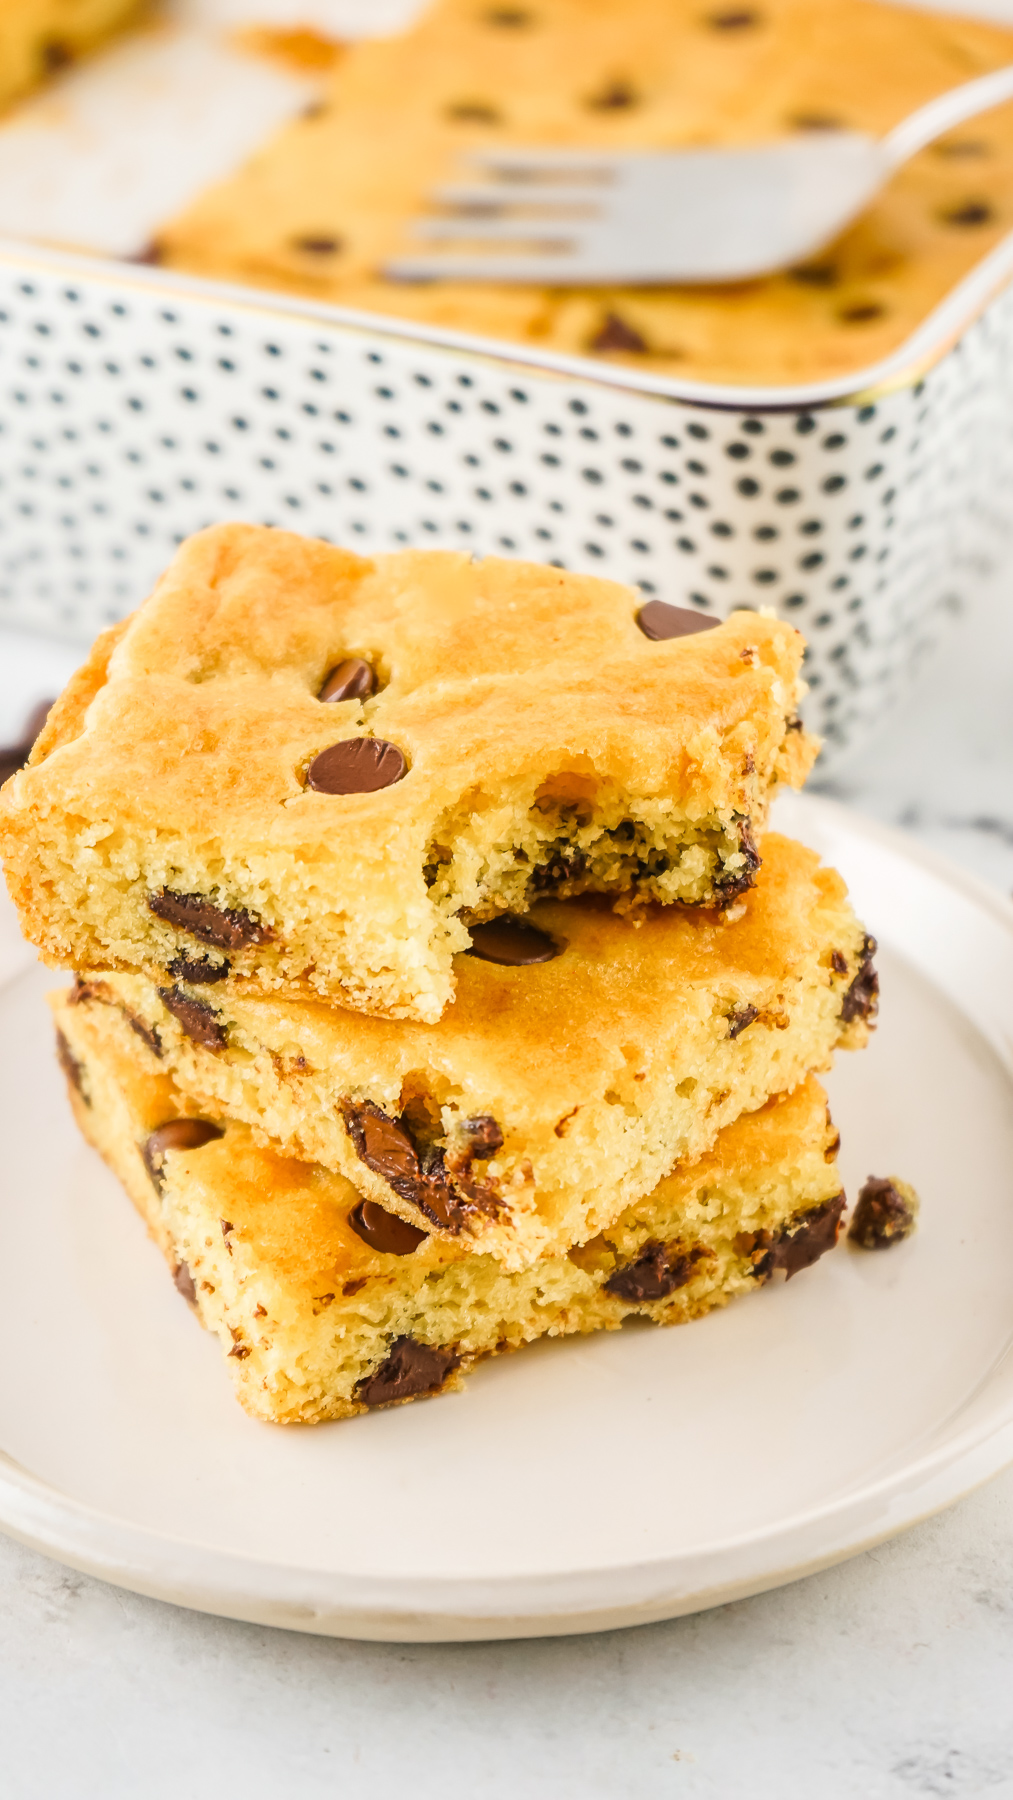 A stack of cake mix cookie bars filled with chocolate chips. The top bar has a bite taken out of it and it's showing the cake-like texture of the cookie.